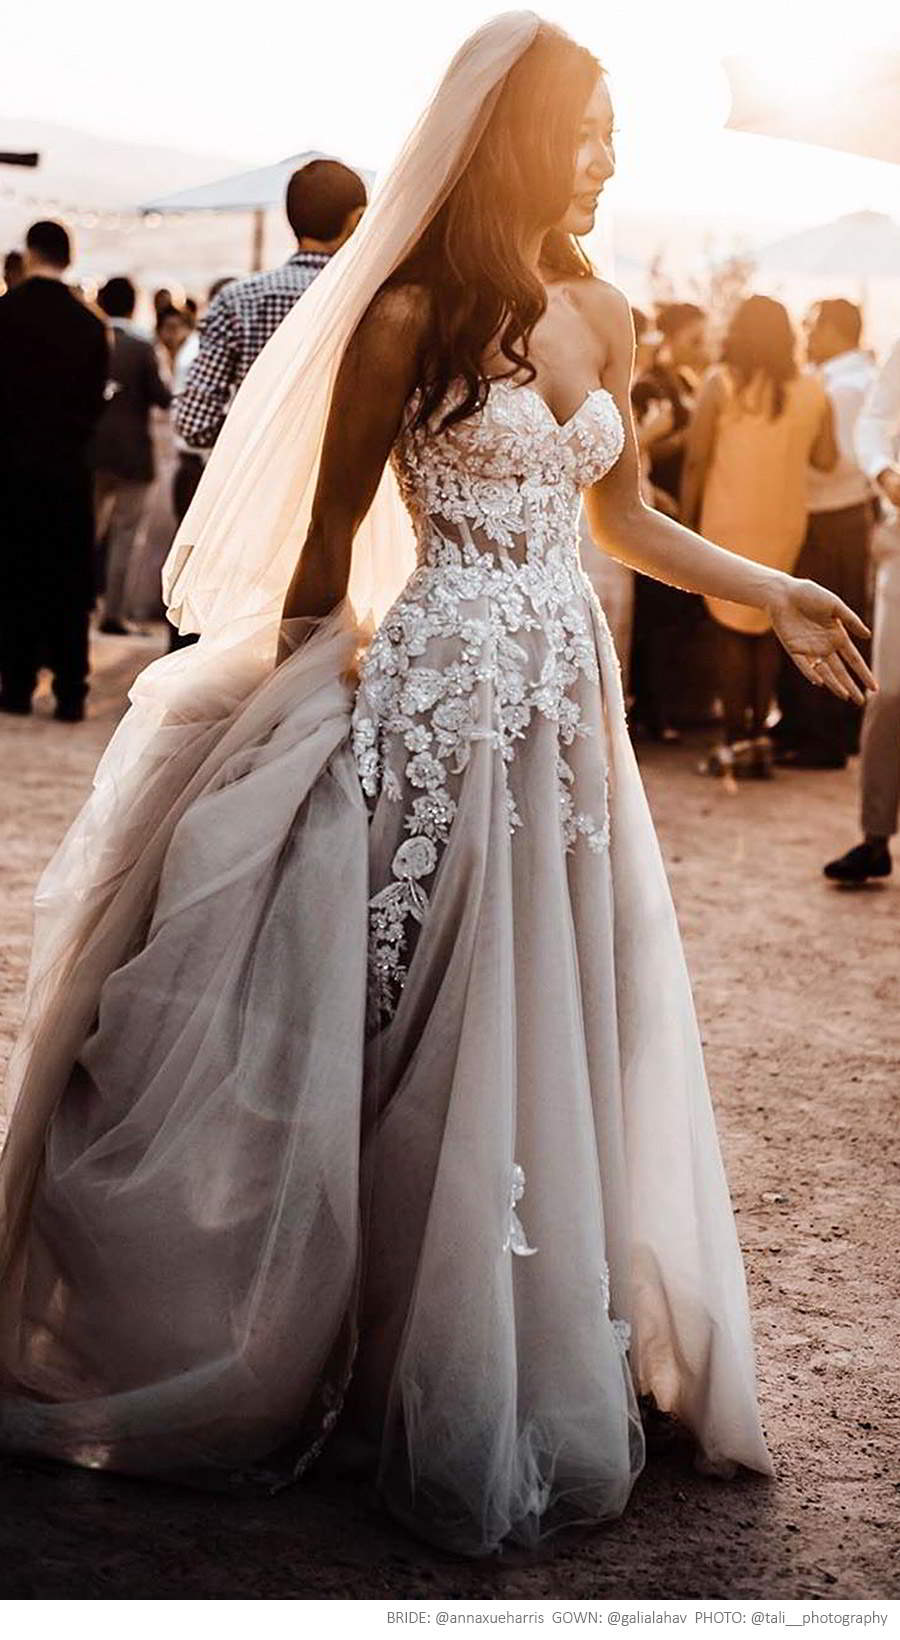 Pin on Bride to be. Wedding Dresses